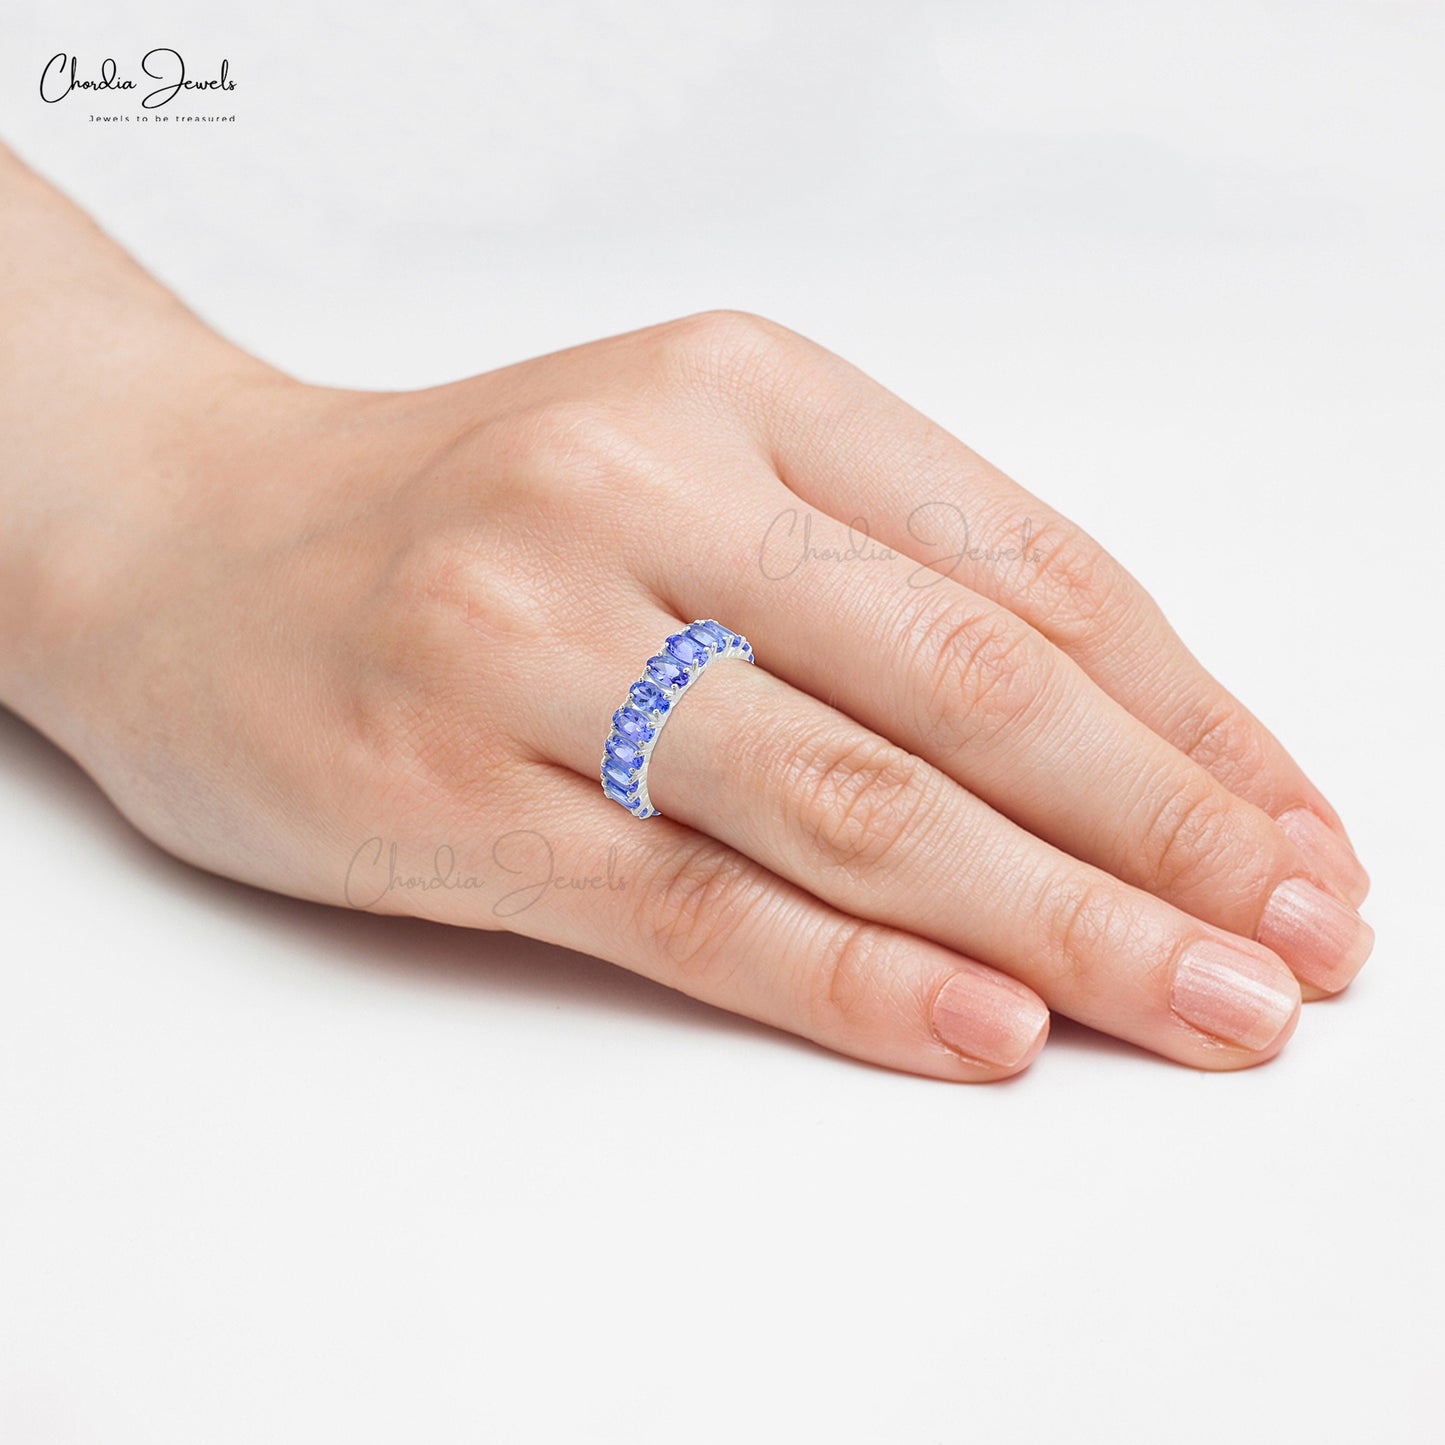 Radiant Eternity Ring With Oval Tanzanite 14k White Gold Handcrafted Fine Stone Ring For Her